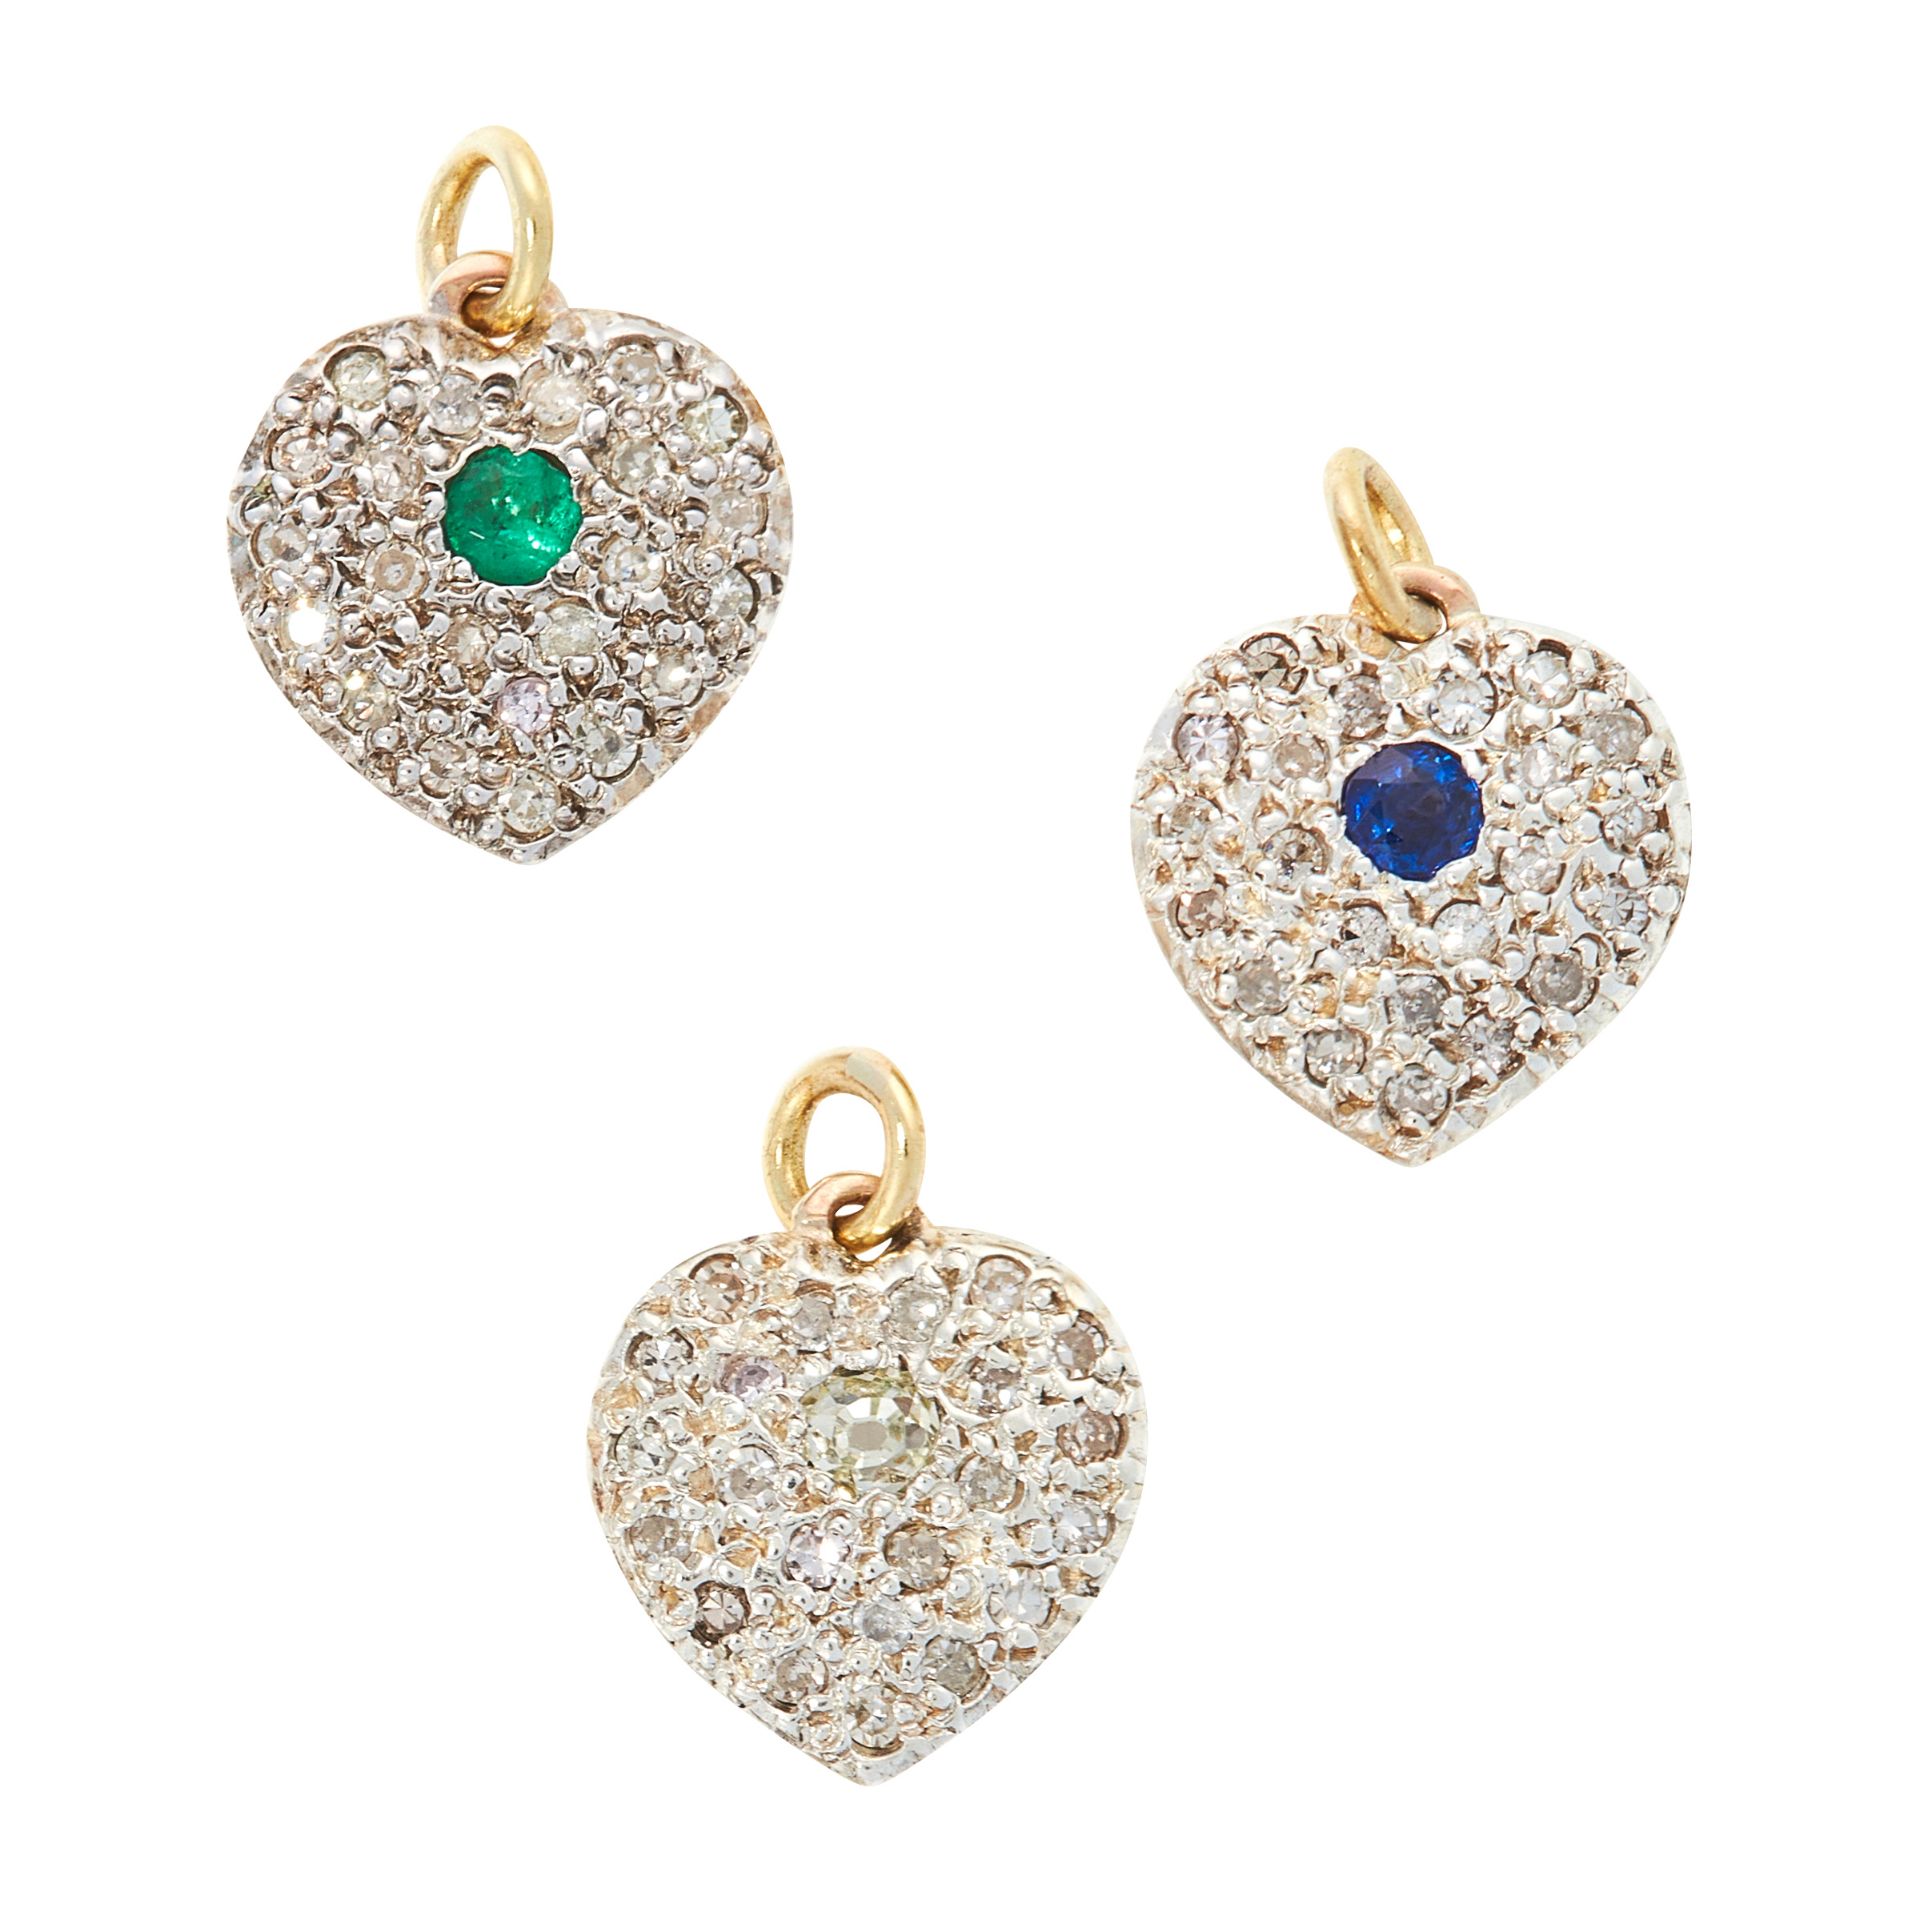 THREE SAPPHIRE, EMERALD AND DIAMOND HEART CHARMS / PENDANTS in yellow gold and silver, each designed